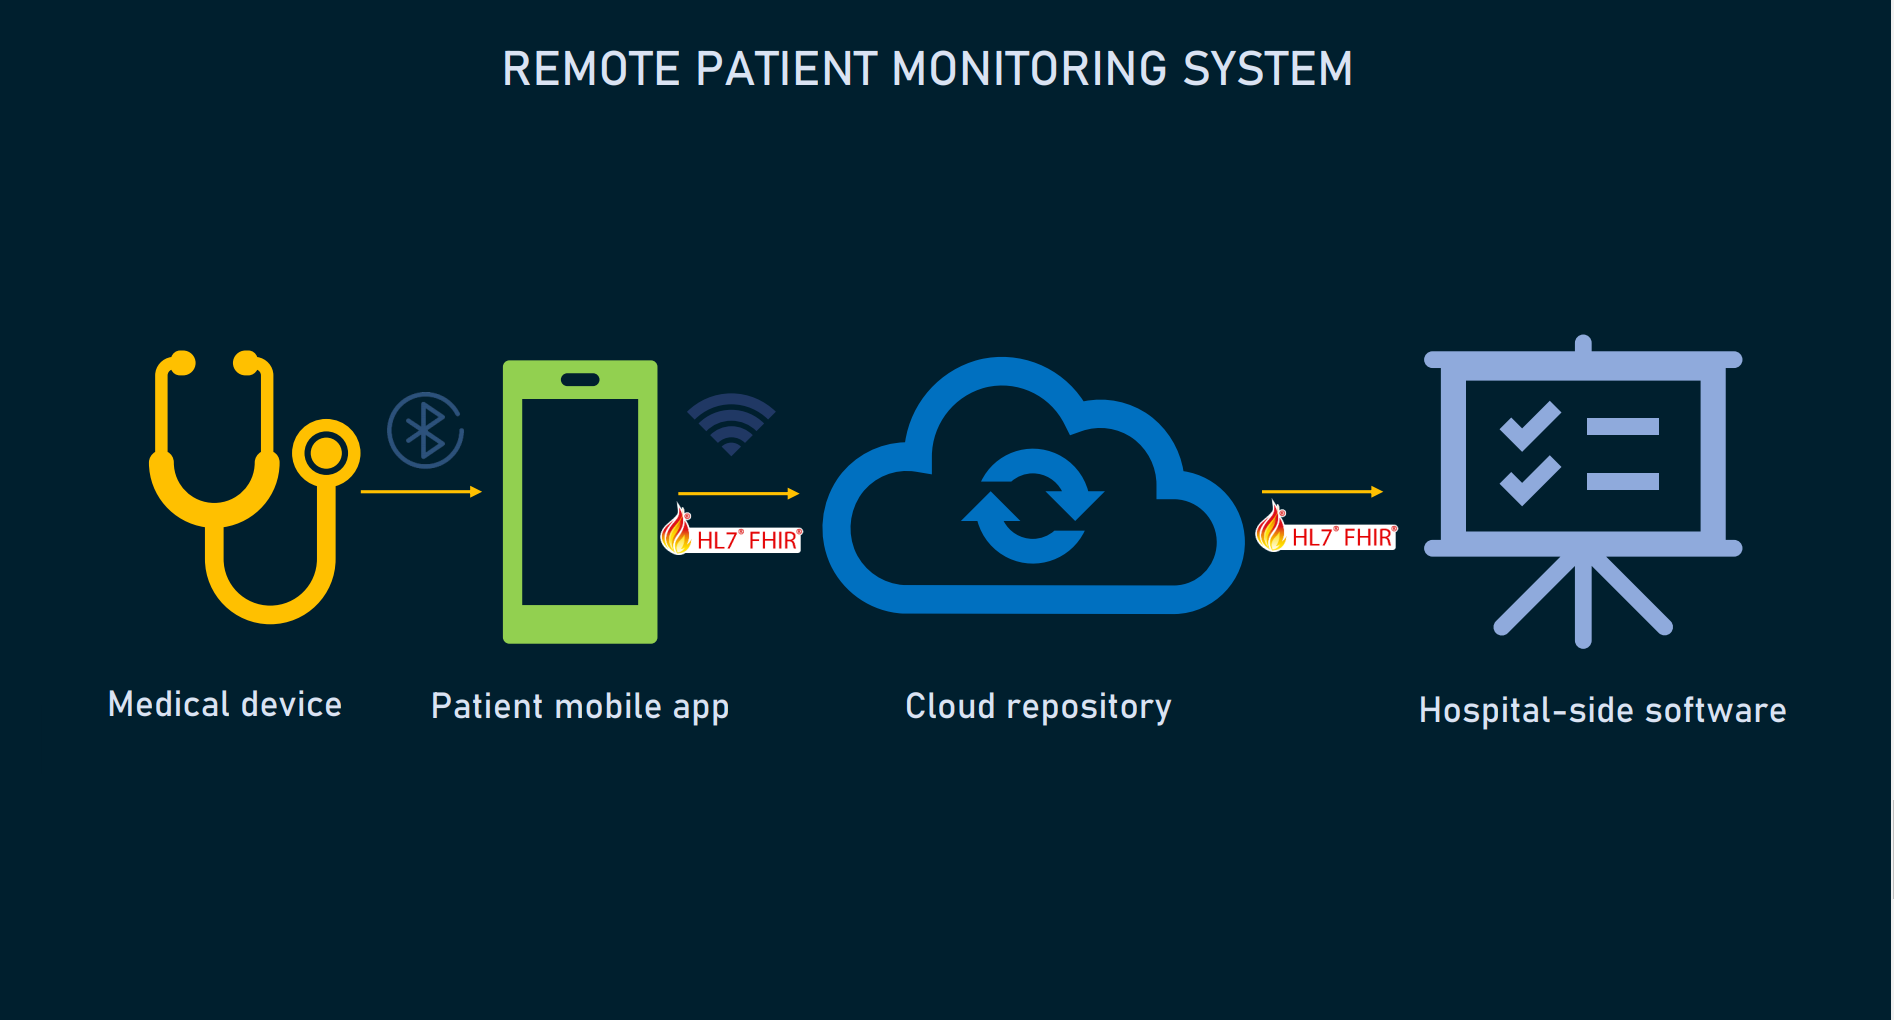 Advancements in Remote Patient Monitoring Technology